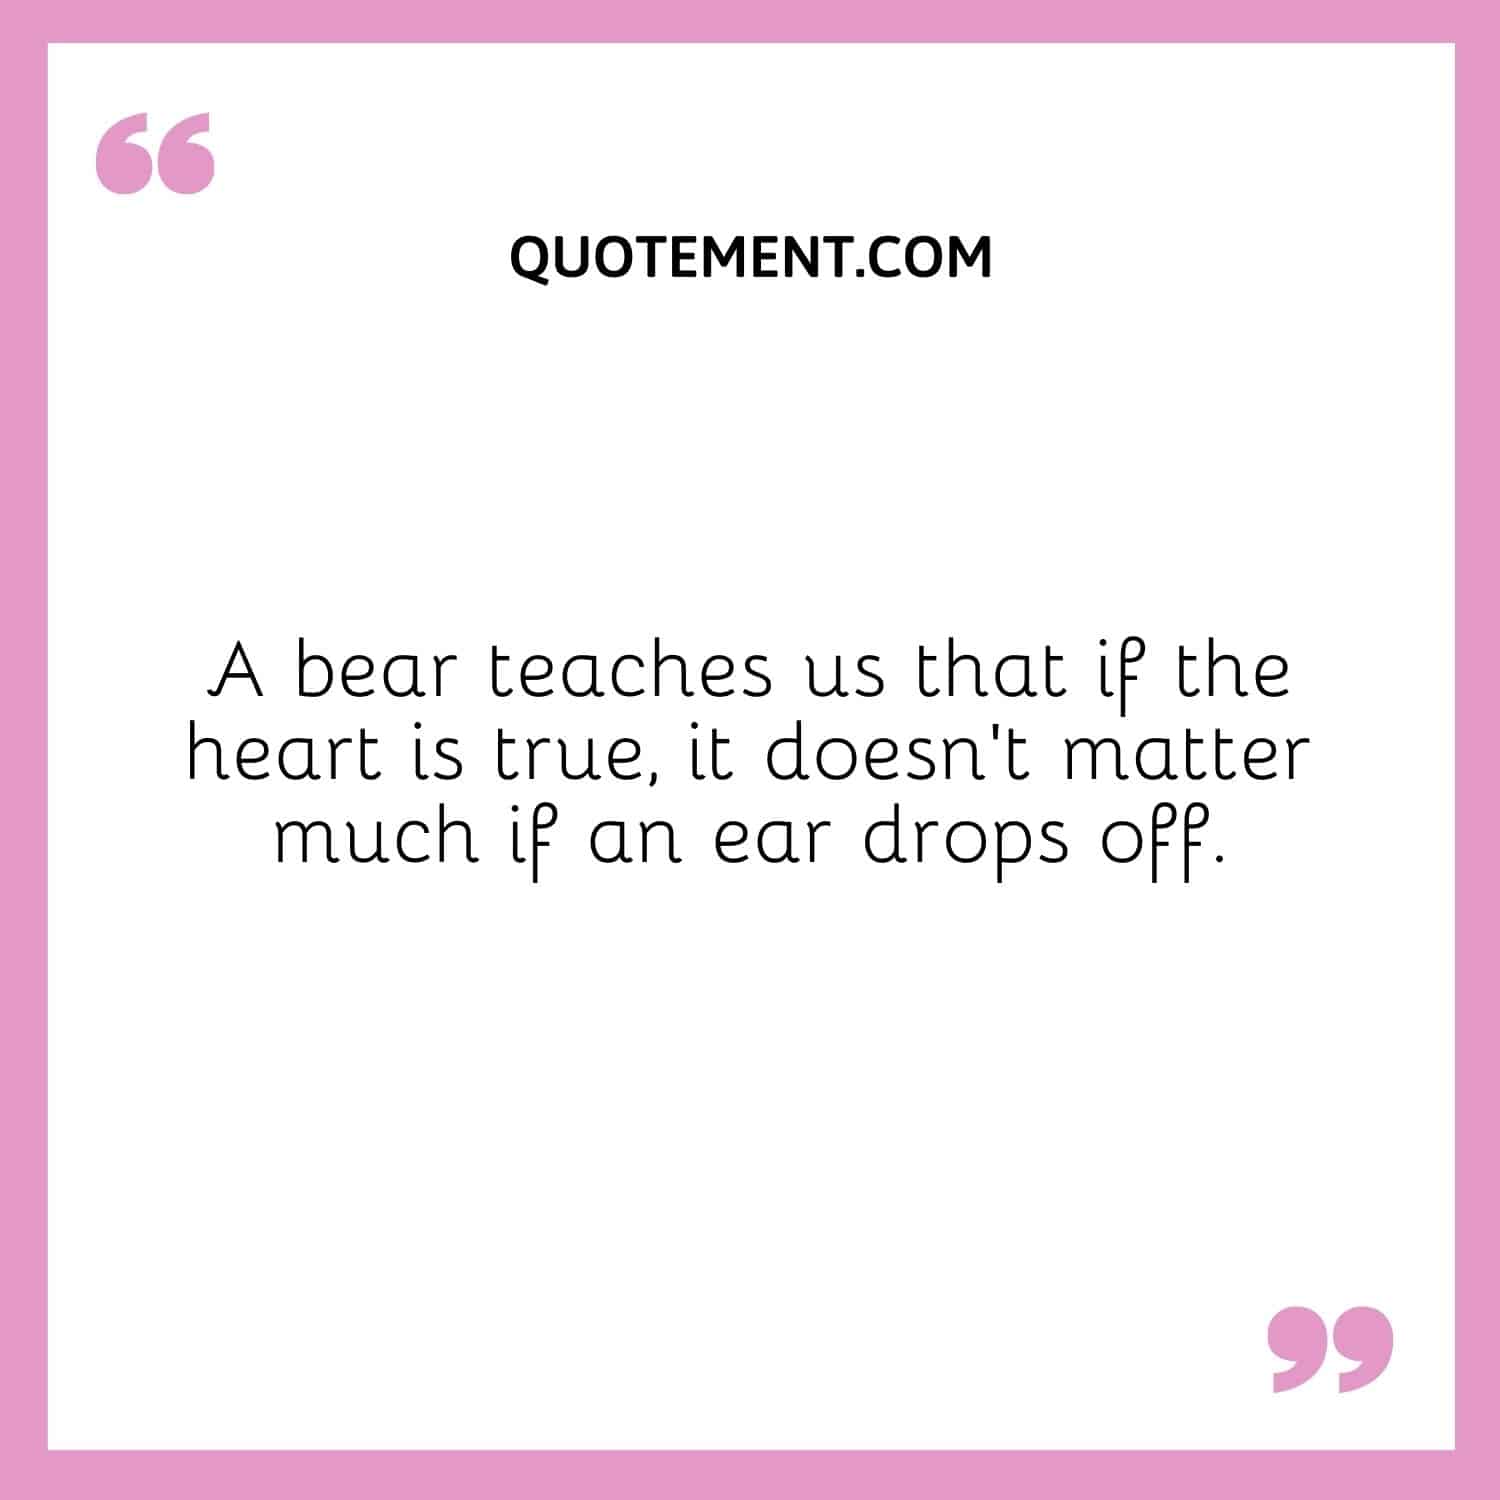 A bear teaches us that if the heart is true